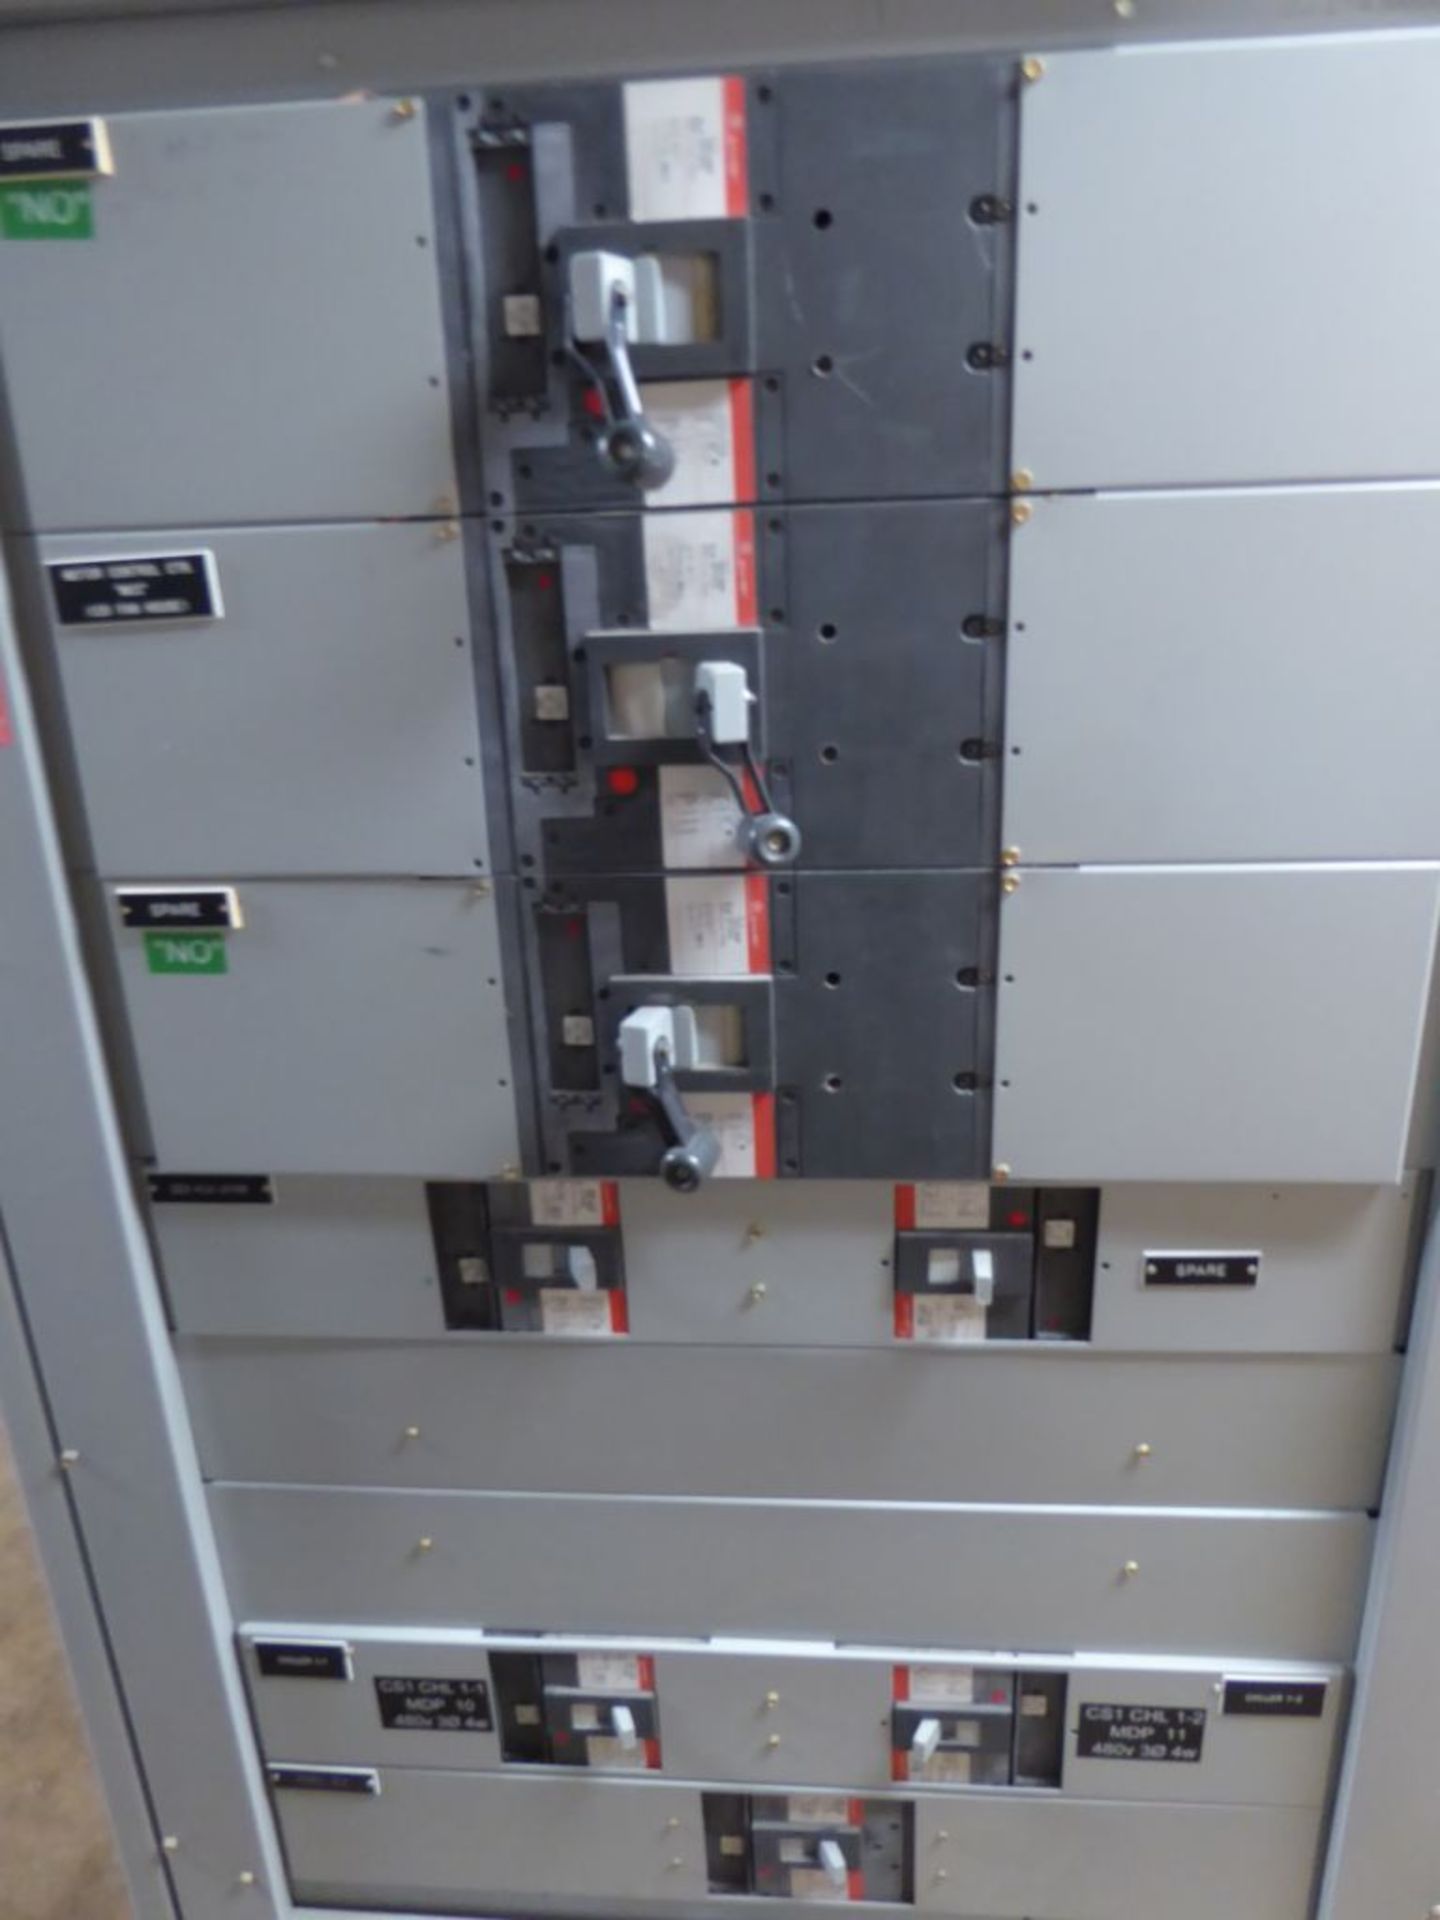 Charlotte, NC - GE 1600A Spectra Series Switchboard - Image 5 of 9